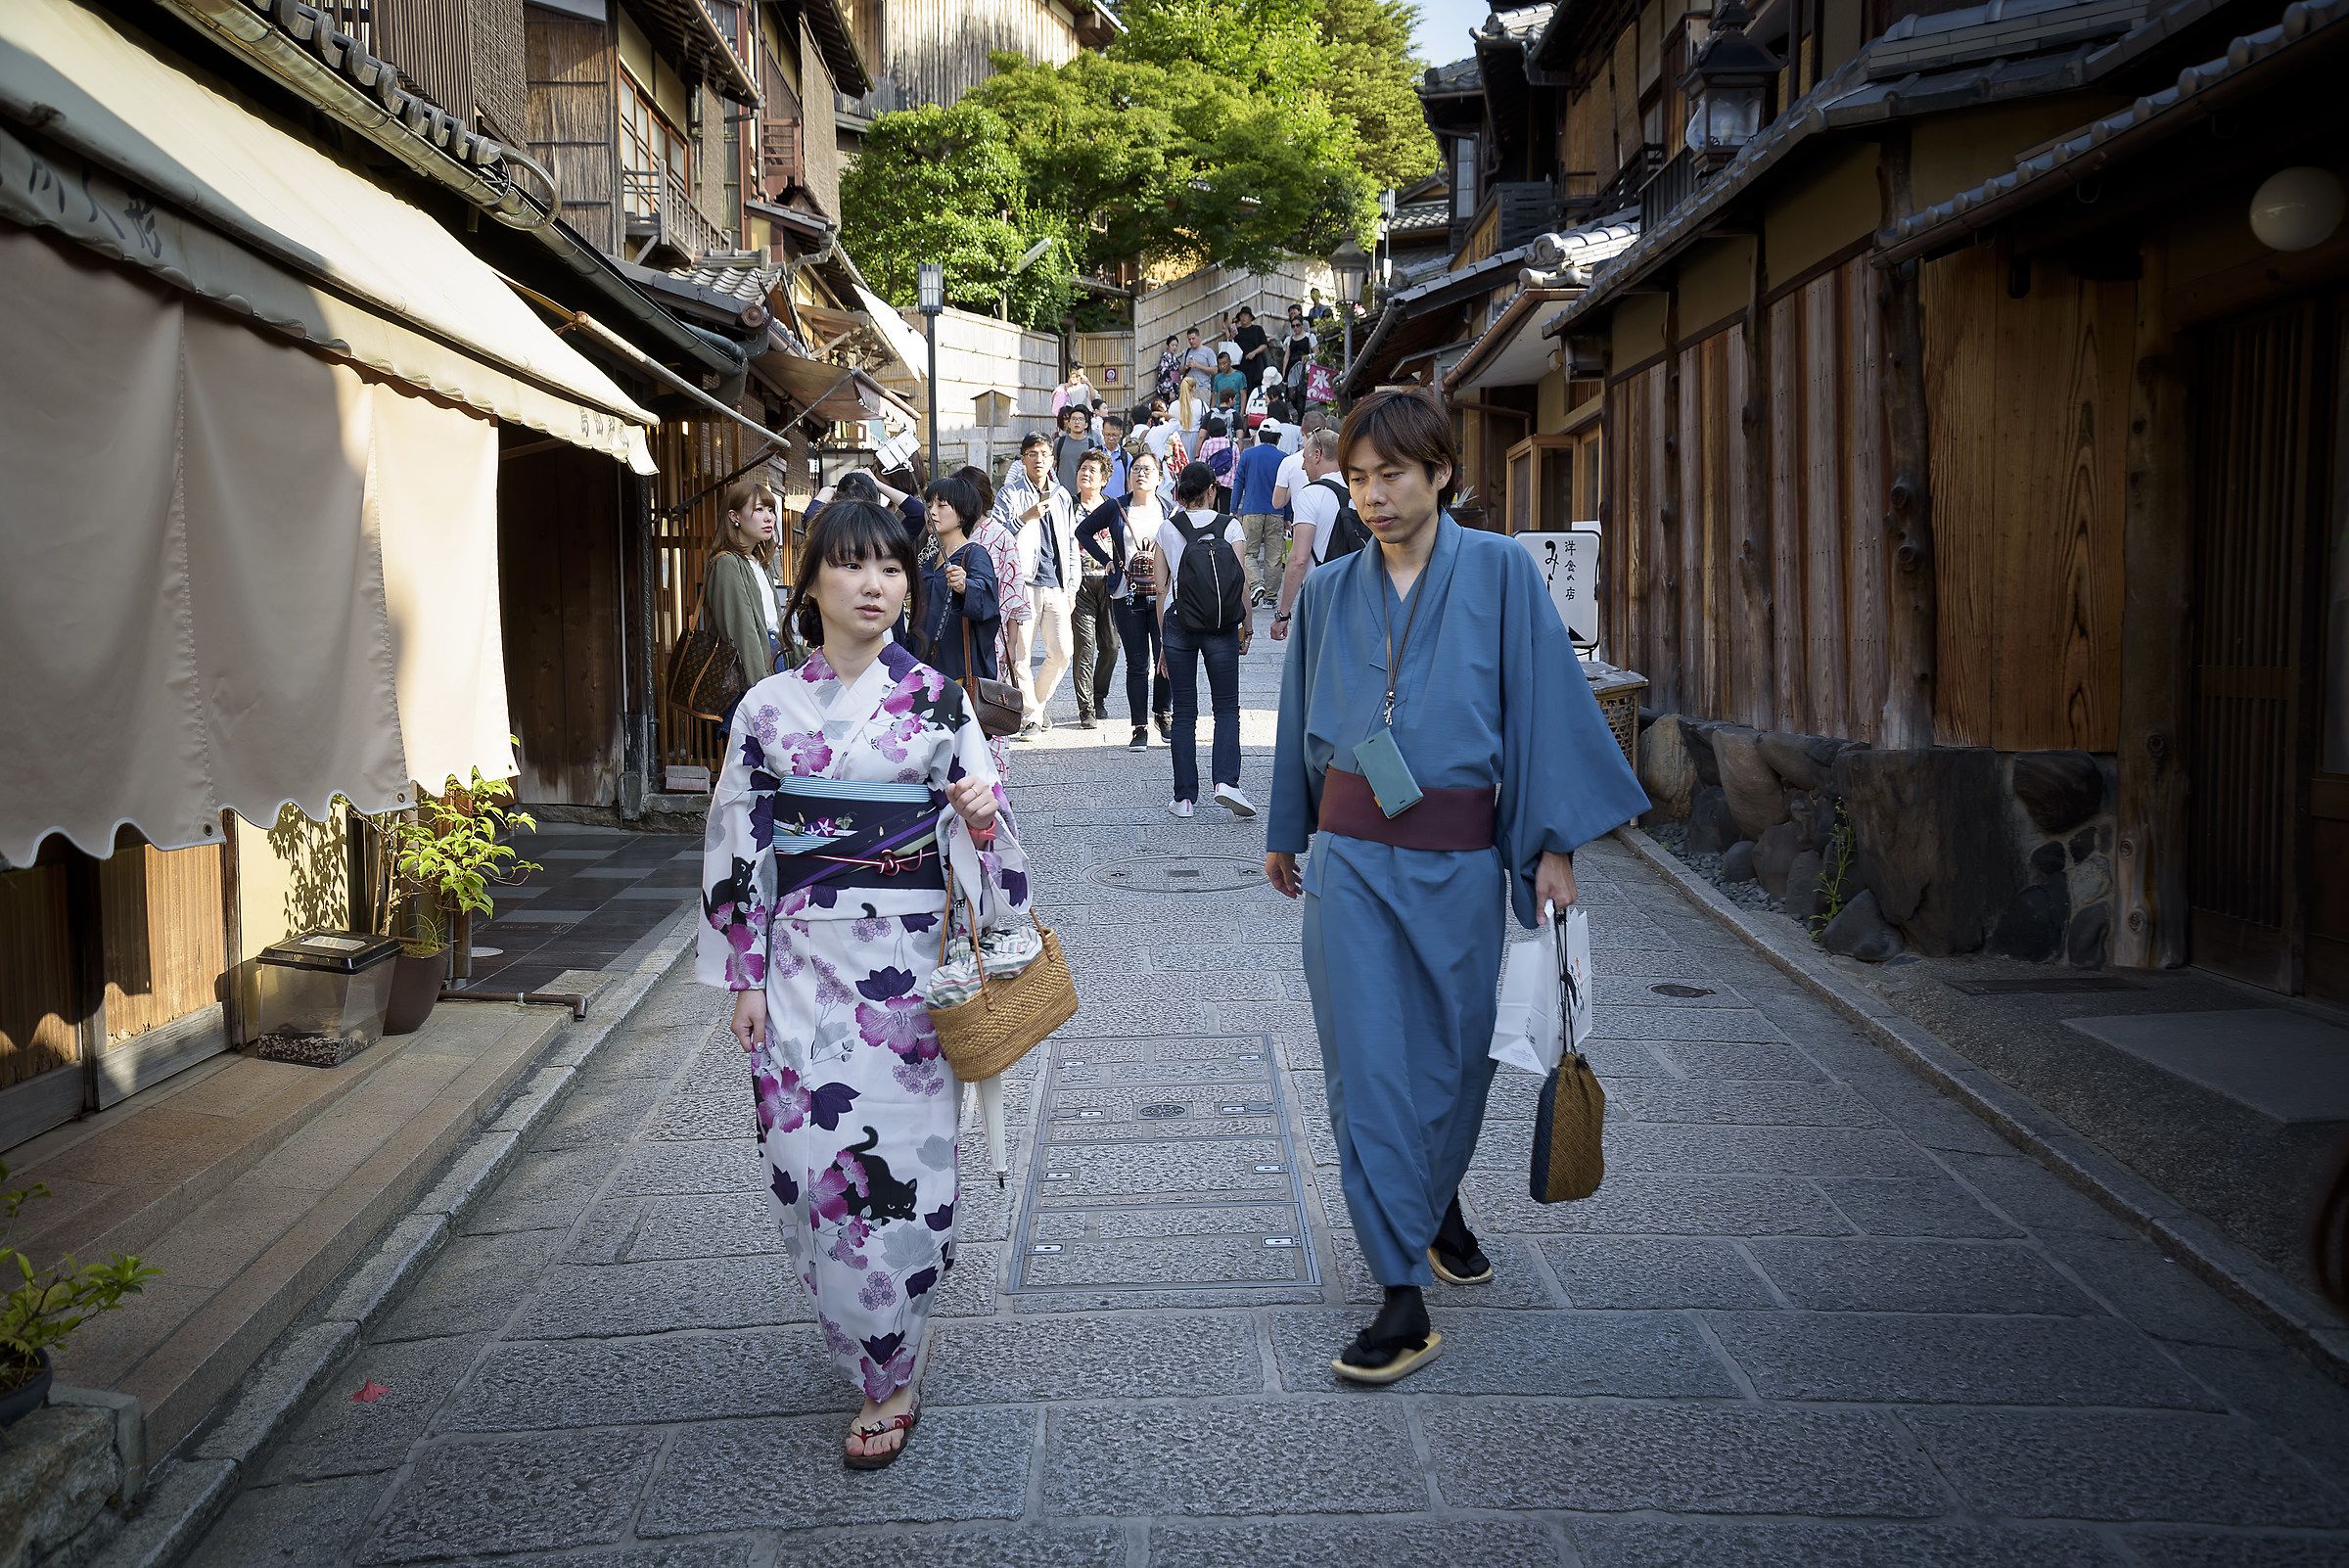 In the streets of Kyoto...